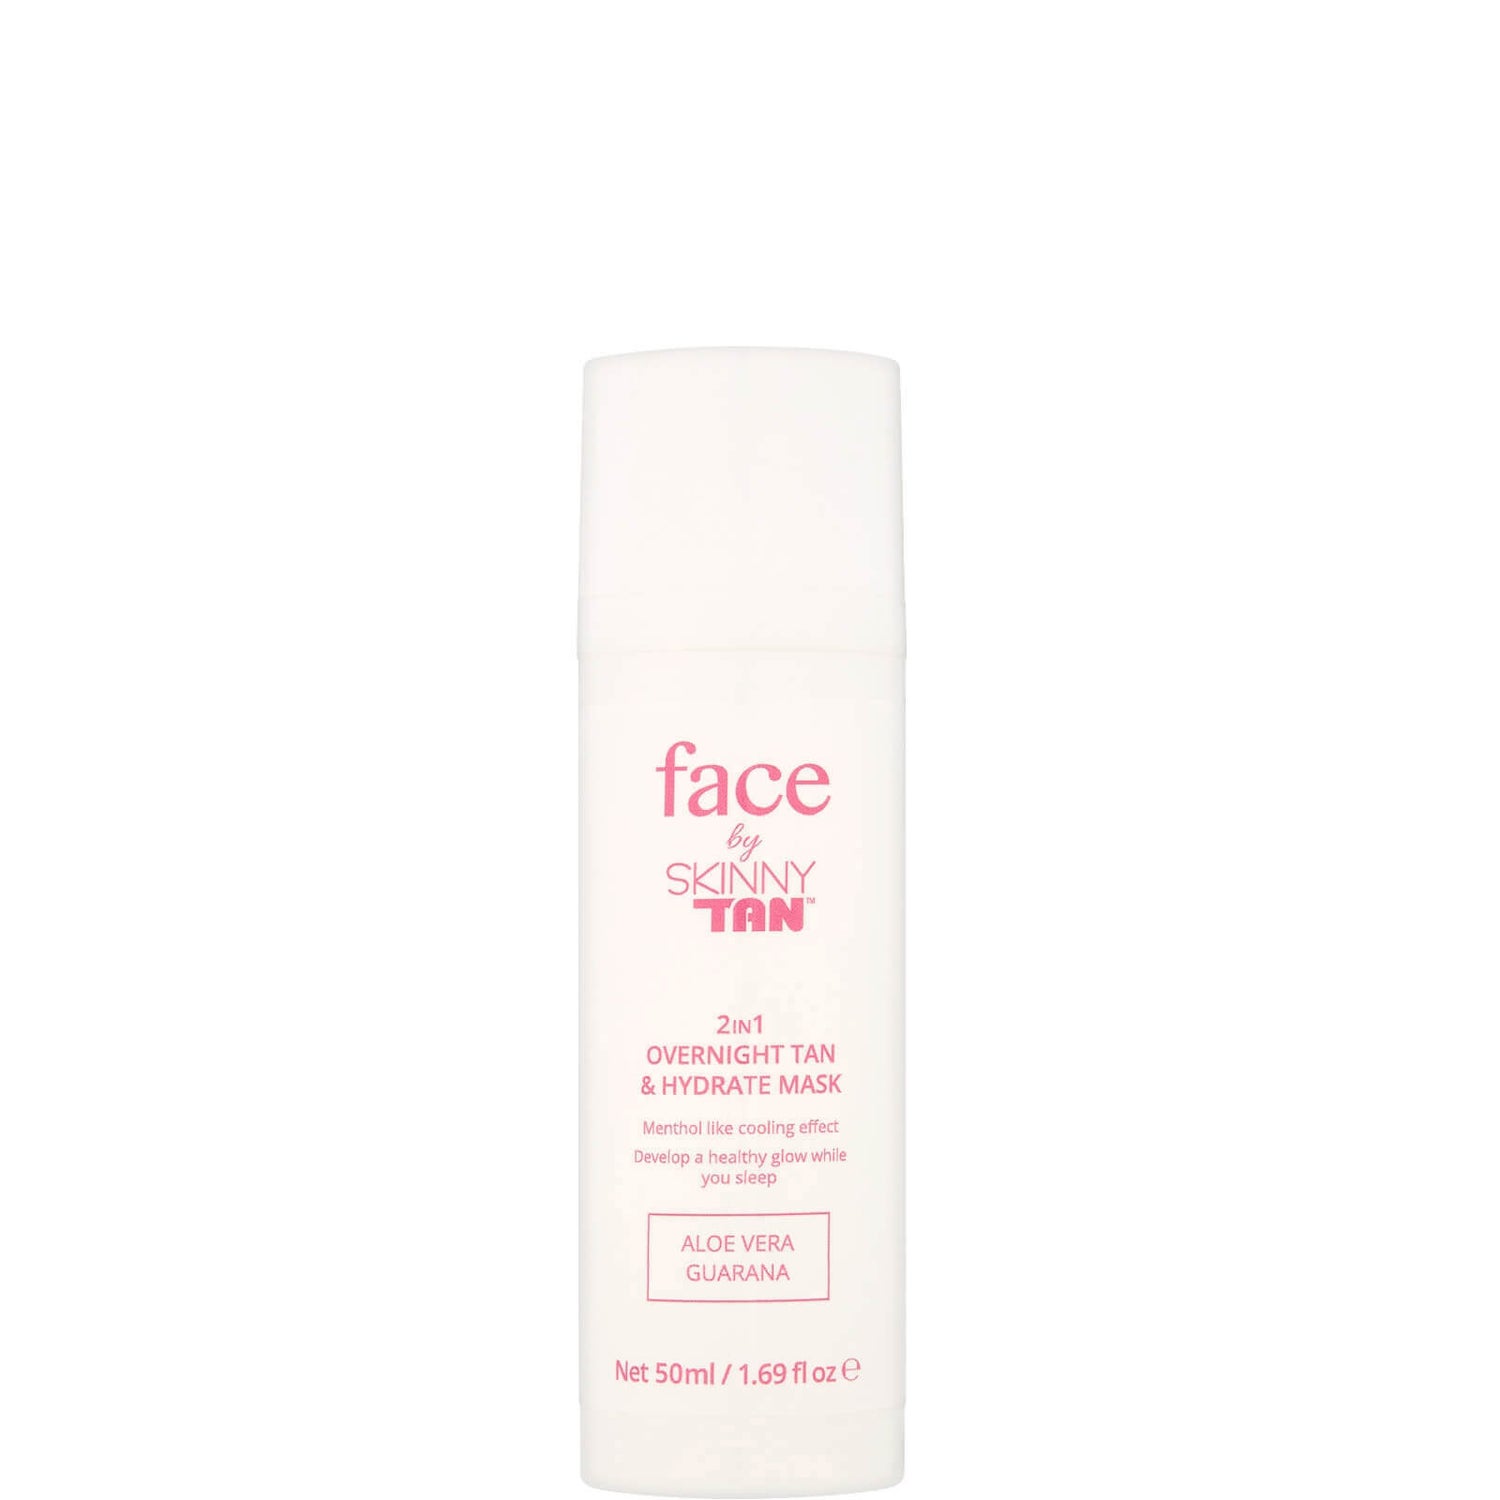 Face by Skinny Tan Overnight Tan & Hydrate Mask 50ml